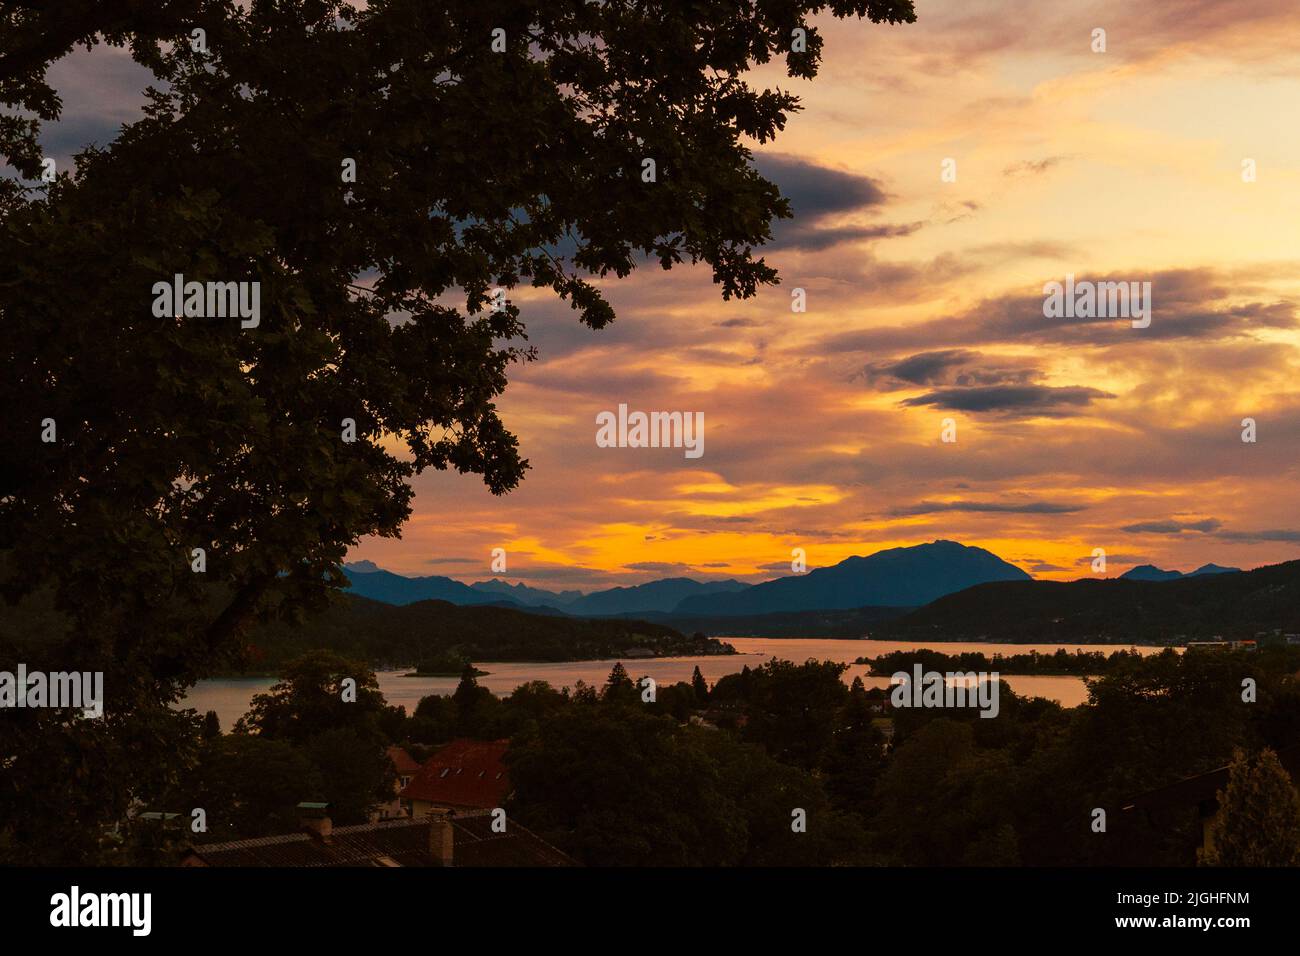 WORTHERSEE LAKE, AUSTRIA - JULY 9, 2022: view of the lake Woerthersee, a lake in the southern Austrian state of Carinthia. Bathing lake and an importa Stock Photo